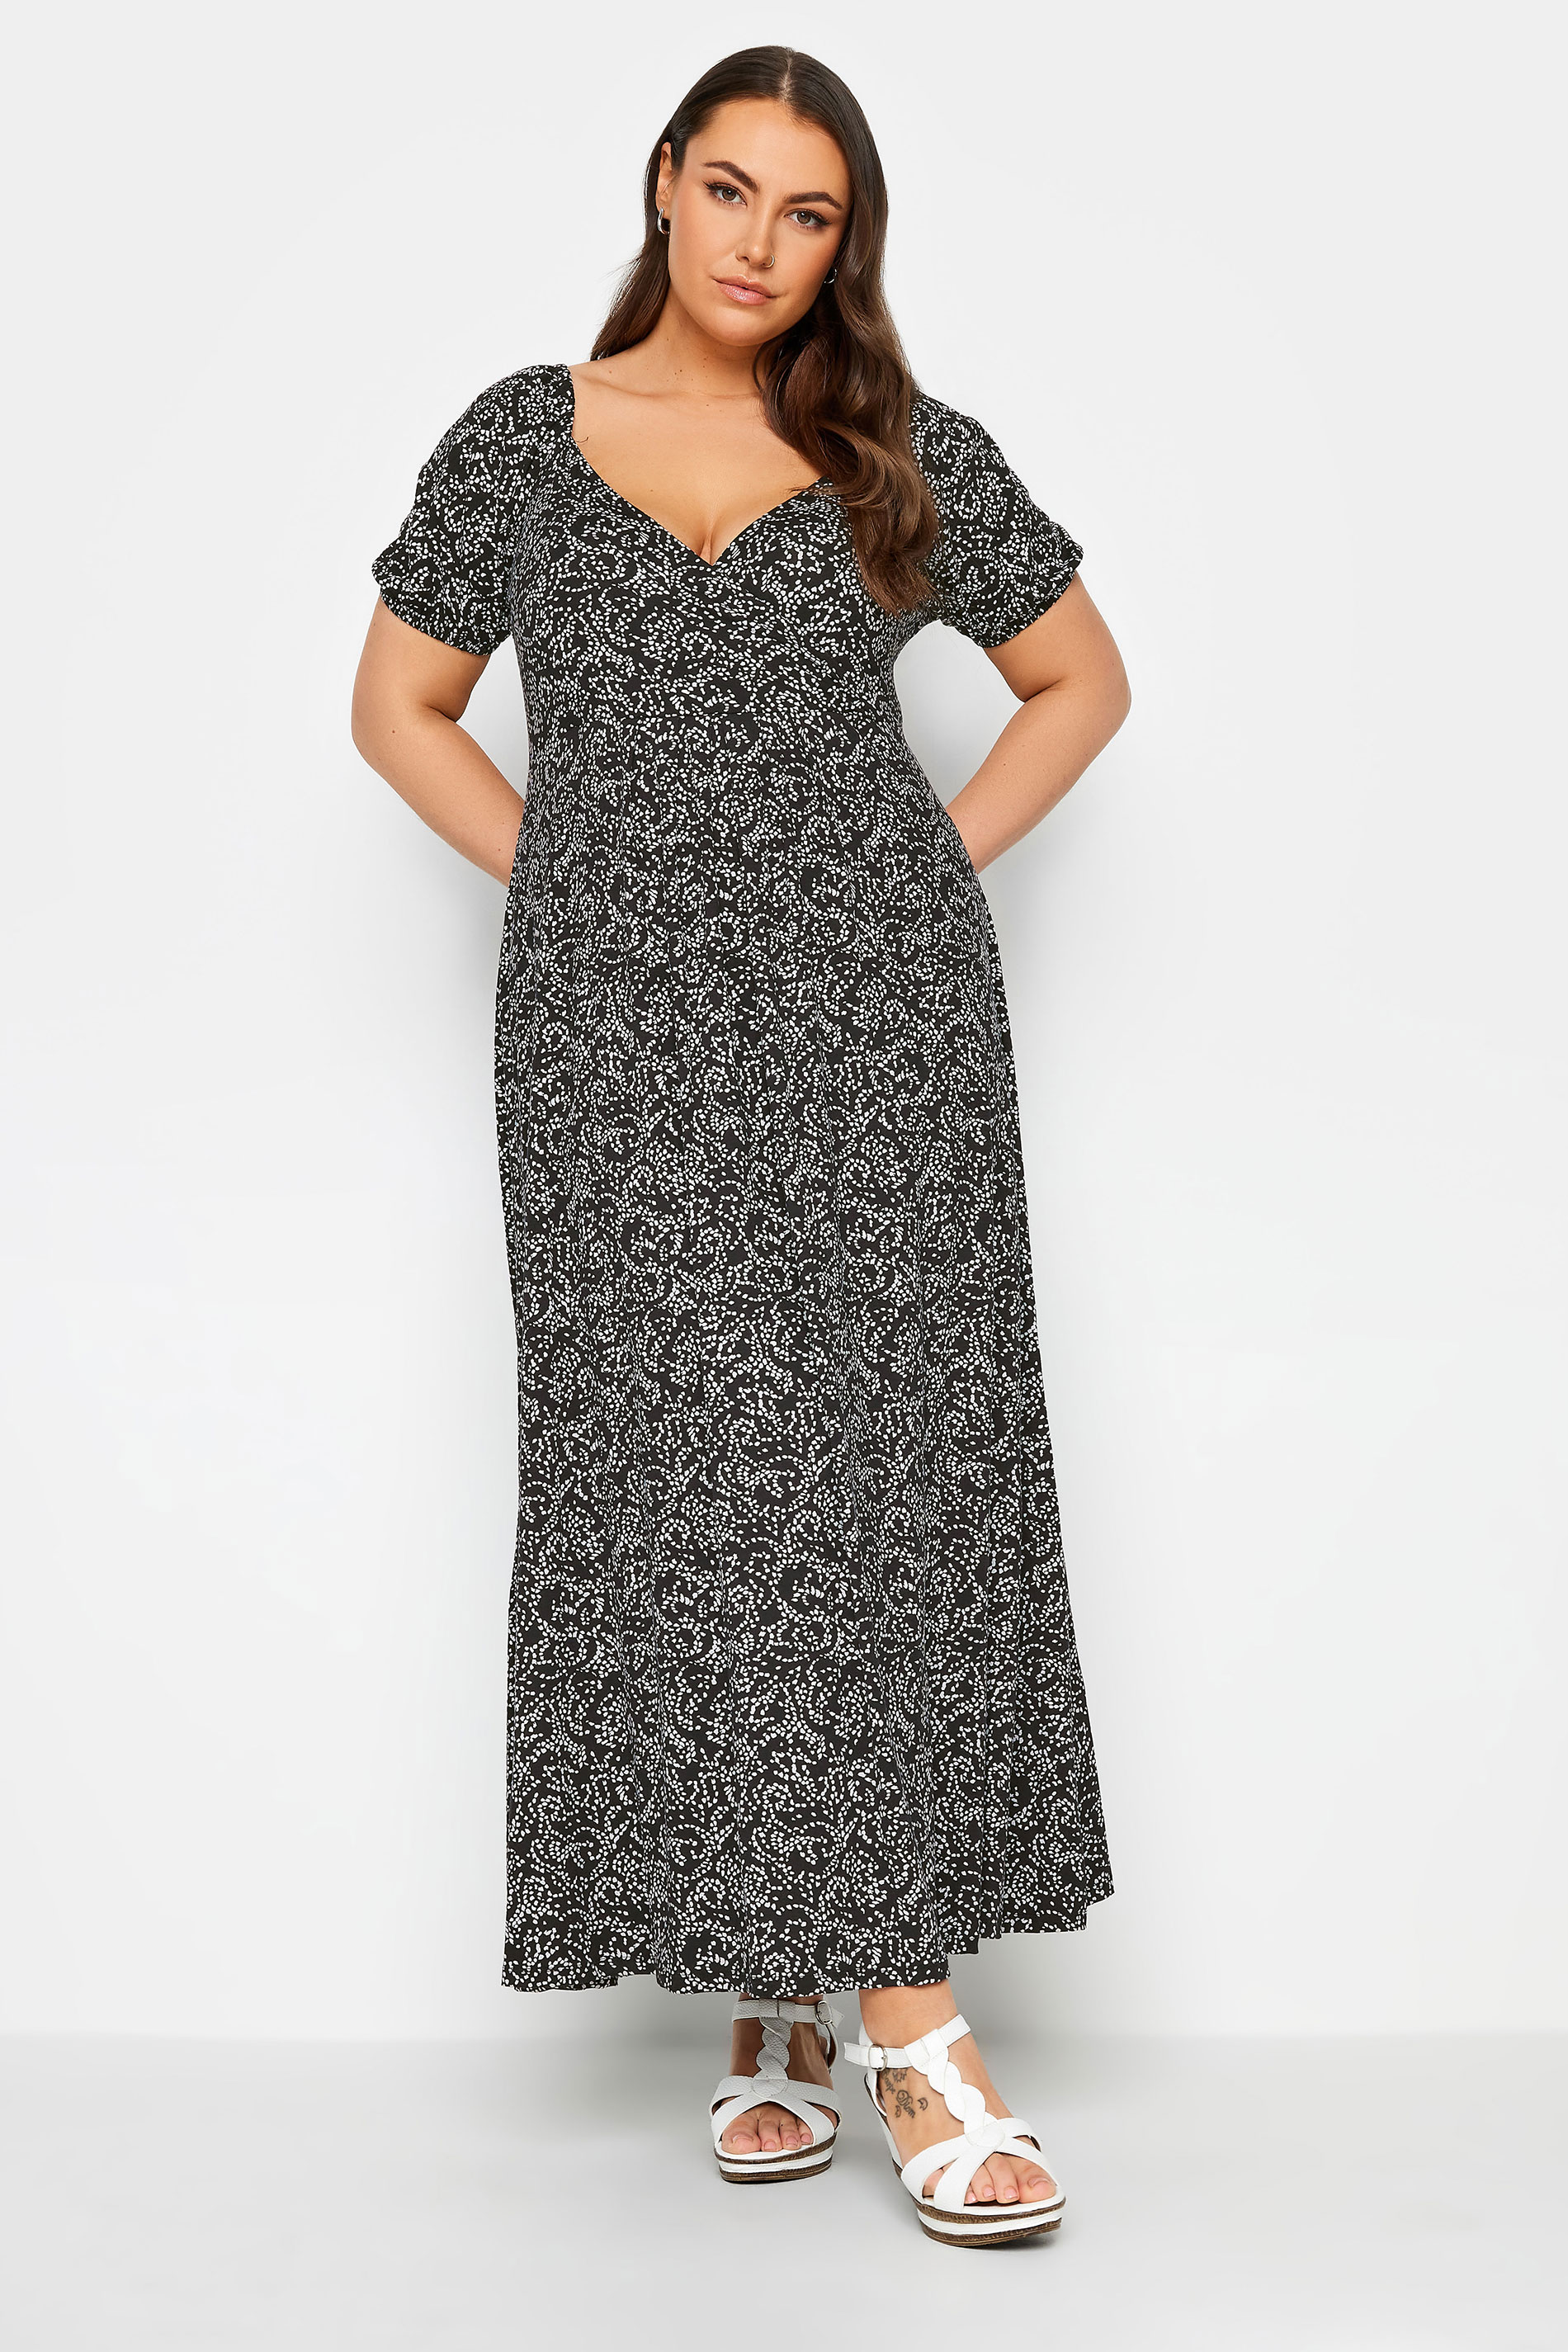 YOURS Plus Size Black Abstract Swirl Print Wrap Maxi Dress | Yours Clothing 1